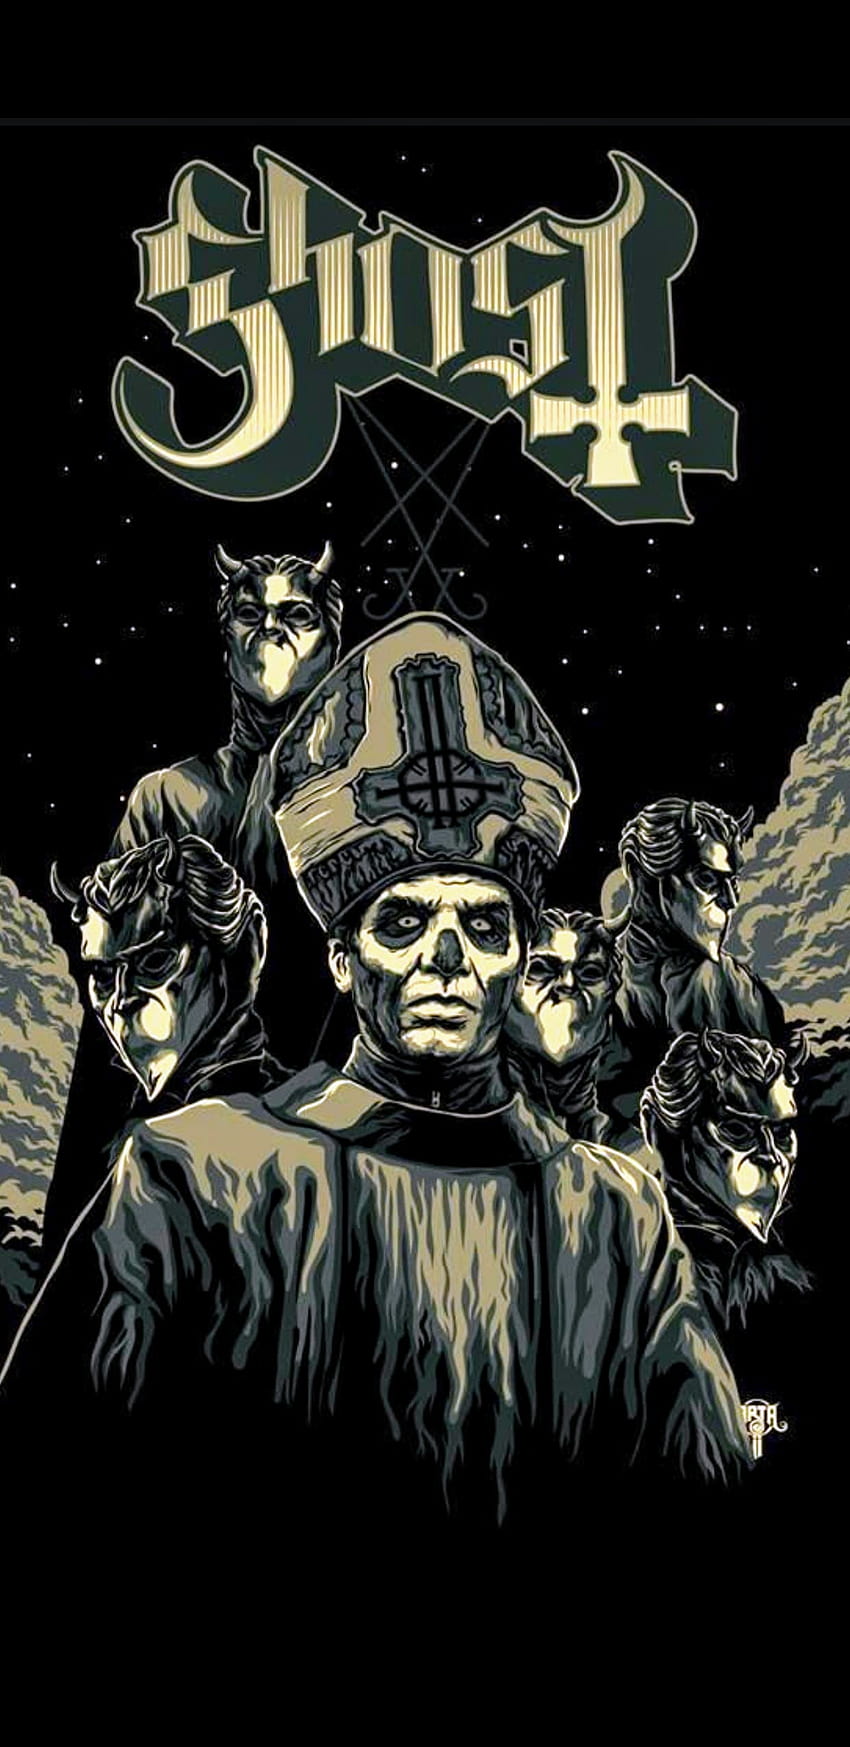 Here's some amazing art of Papa Emeritus III and his nameless ghouls: Ghostbc HD phone wallpaper